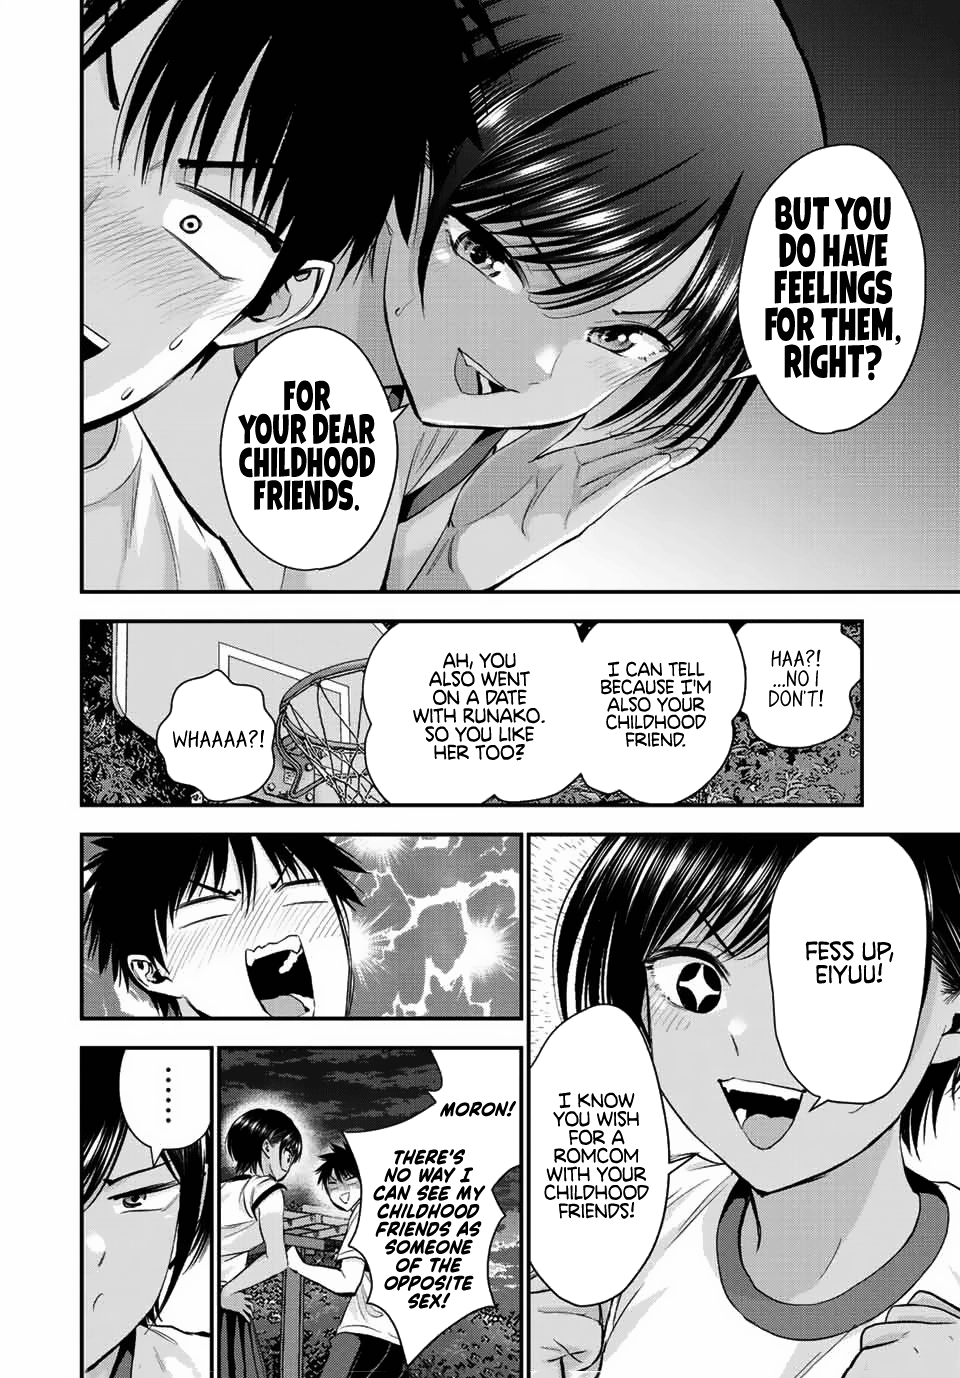 No More Love With The Girls - Page 2